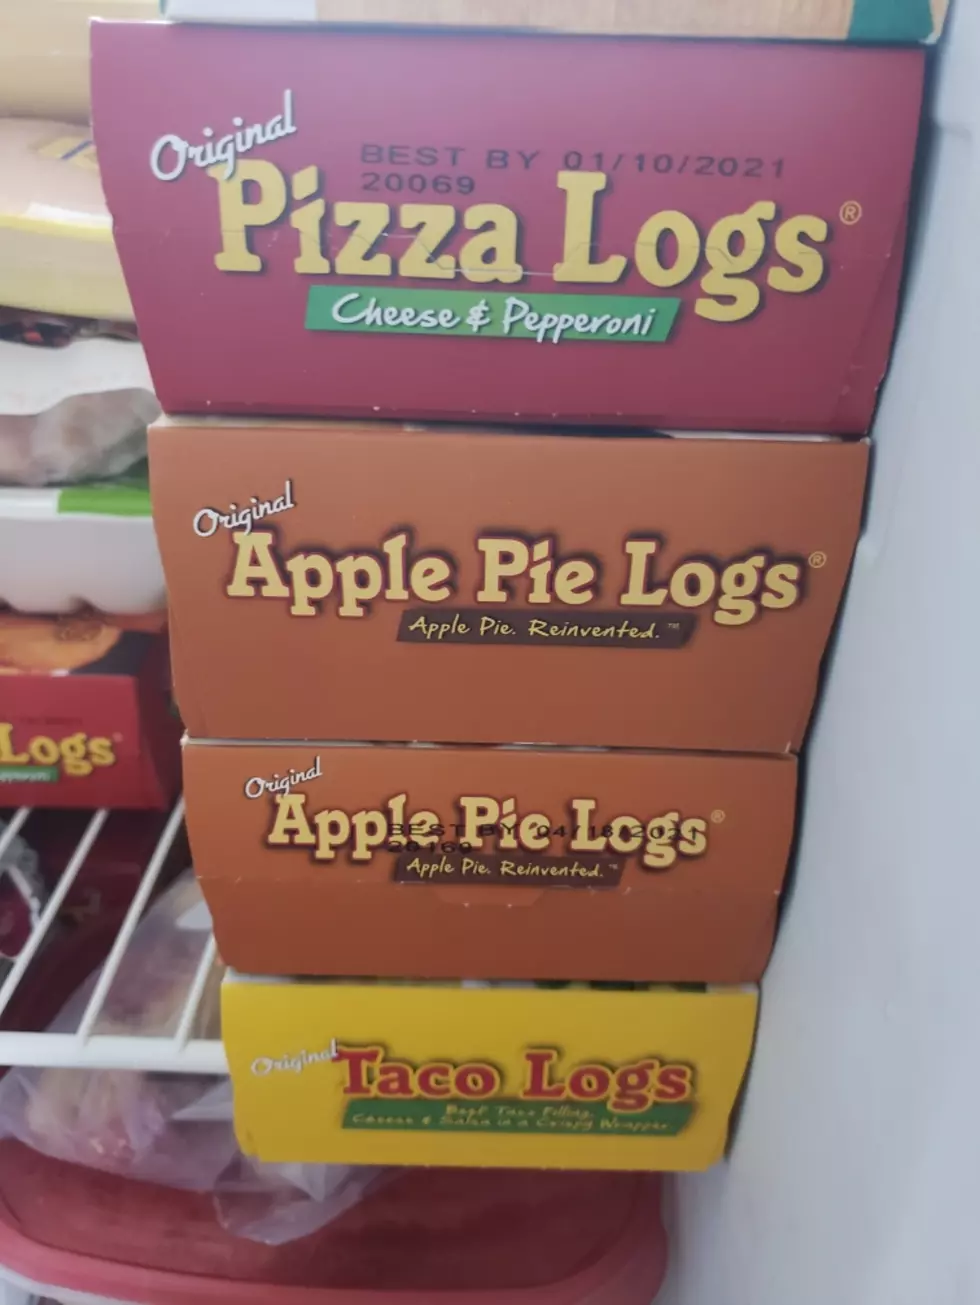 Here Are All The Different Pizza Logs You Can Buy